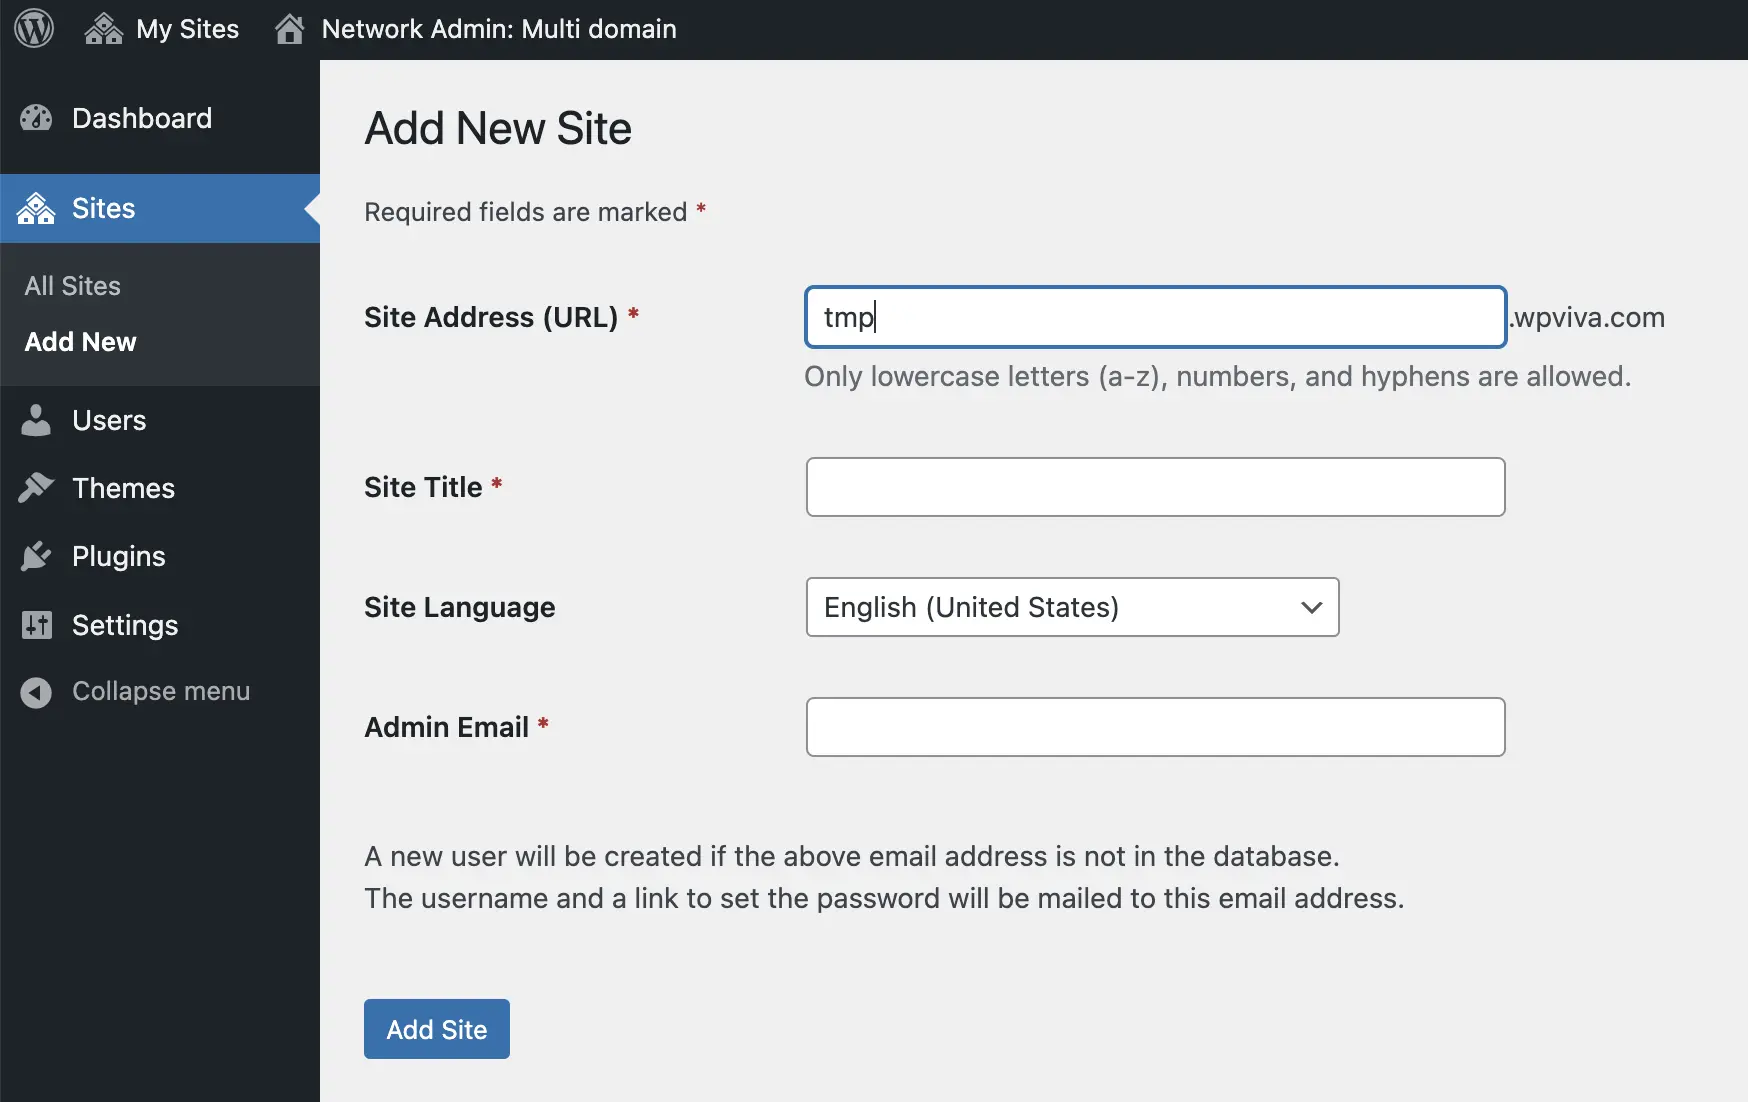 Add New Site form of WordPress multisite